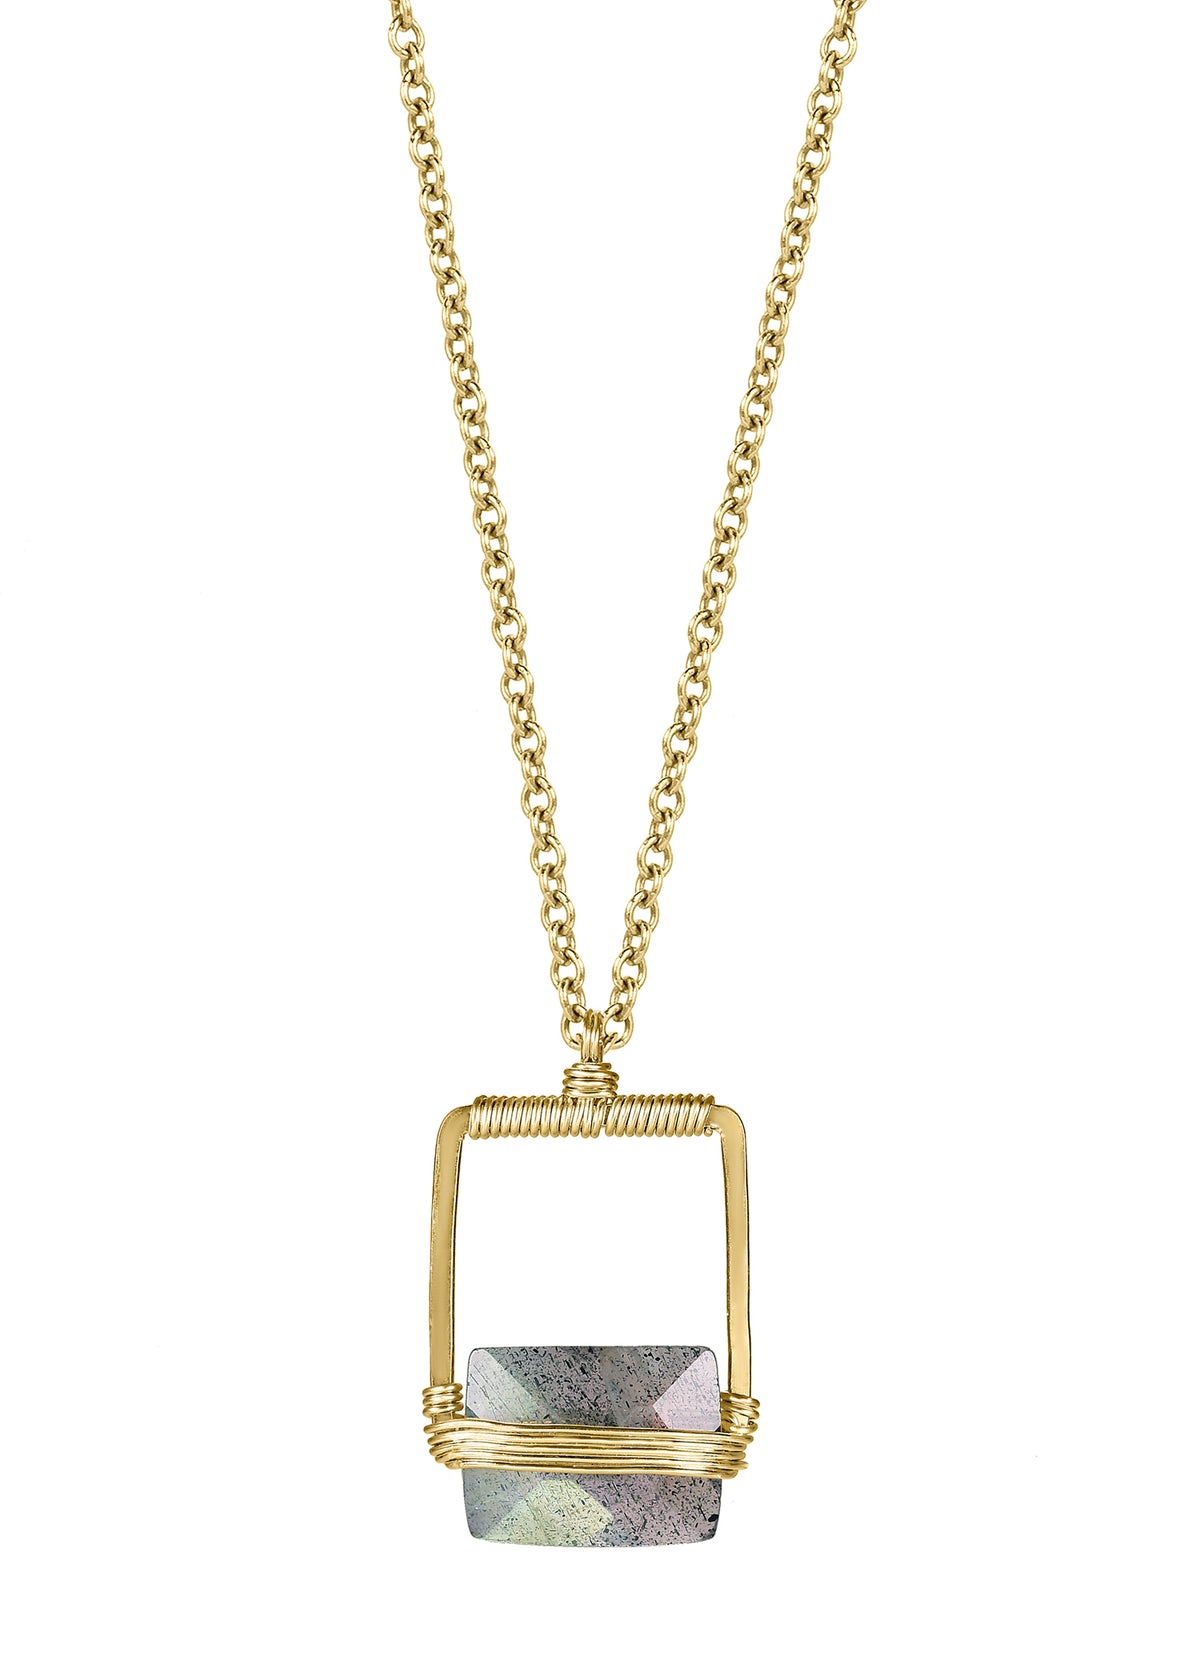 Labradorite 14k gold fill Necklace measures 16&quot; in length Pendant measures 9/16&quot; in length and 3/8&quot; in width at the widest point Handmade in our Los Angeles studio